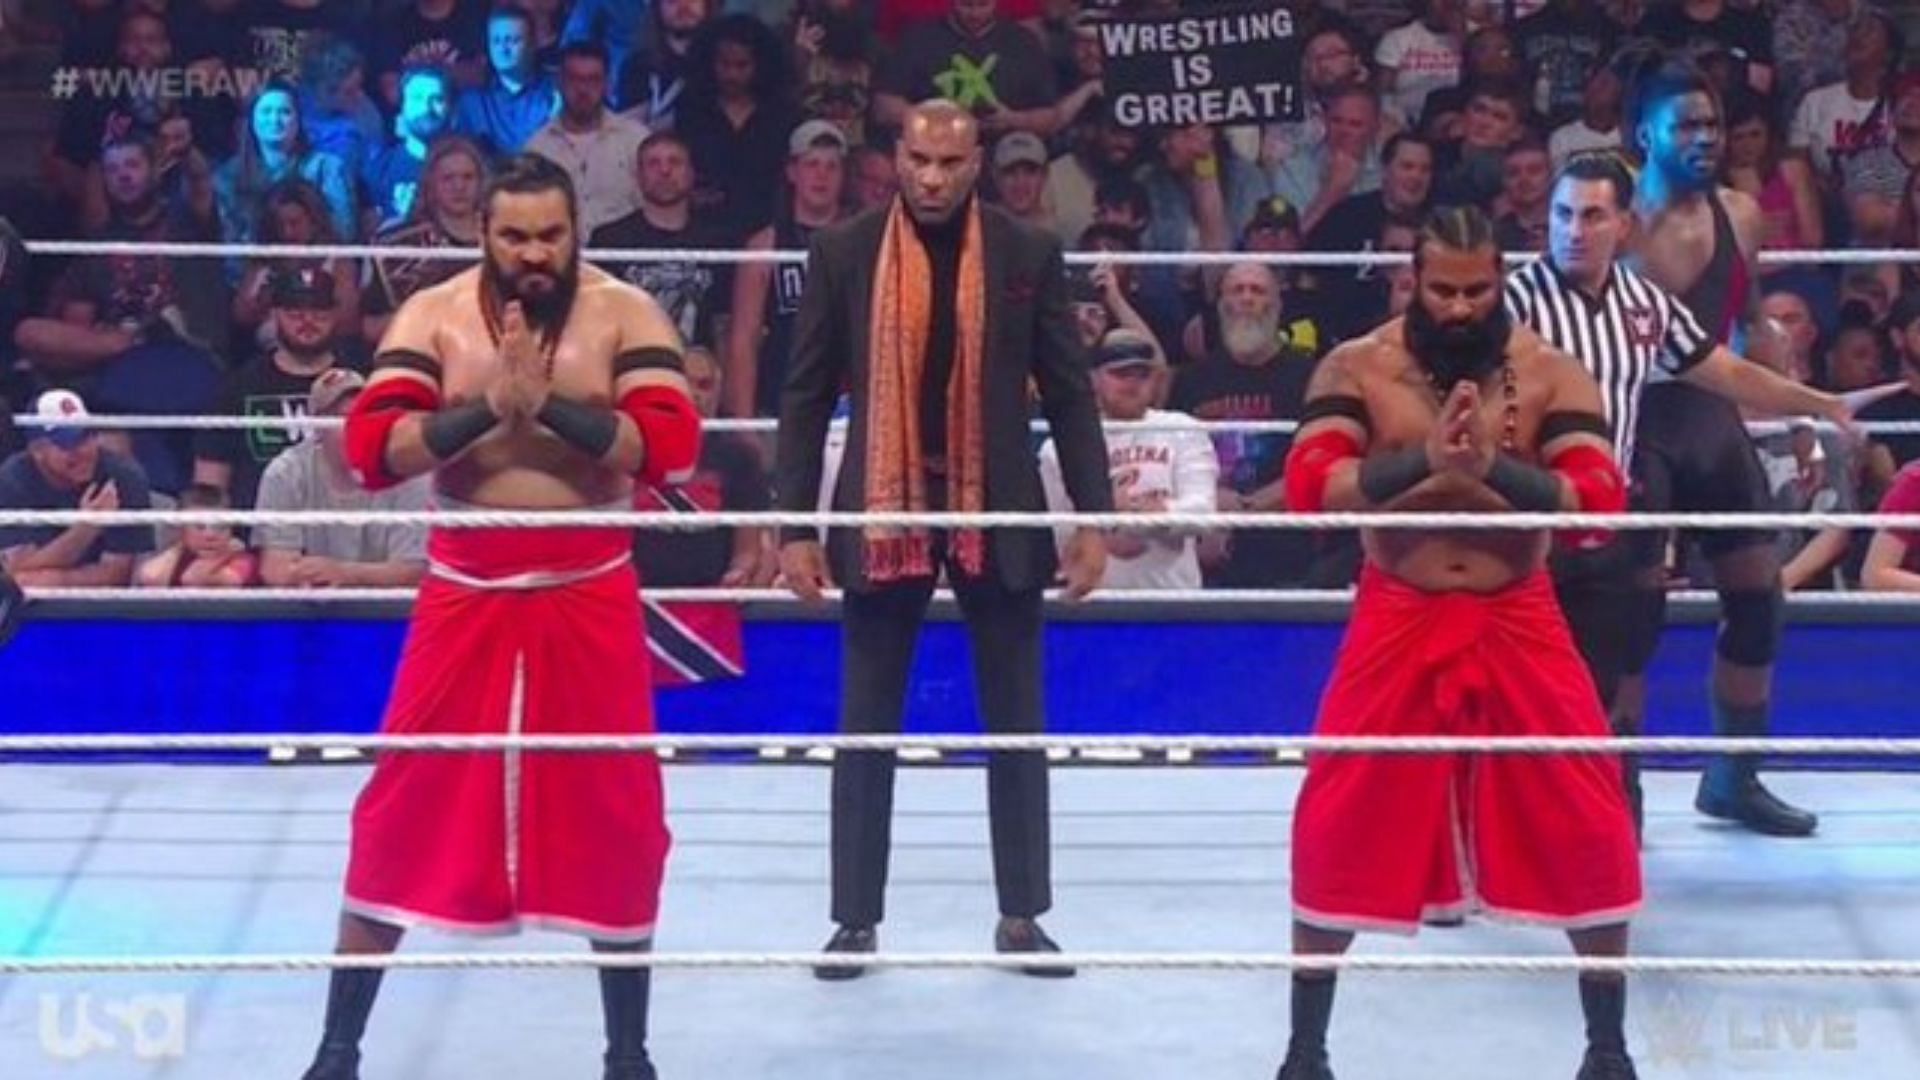 Indus Sher made their main roster debut on RAW